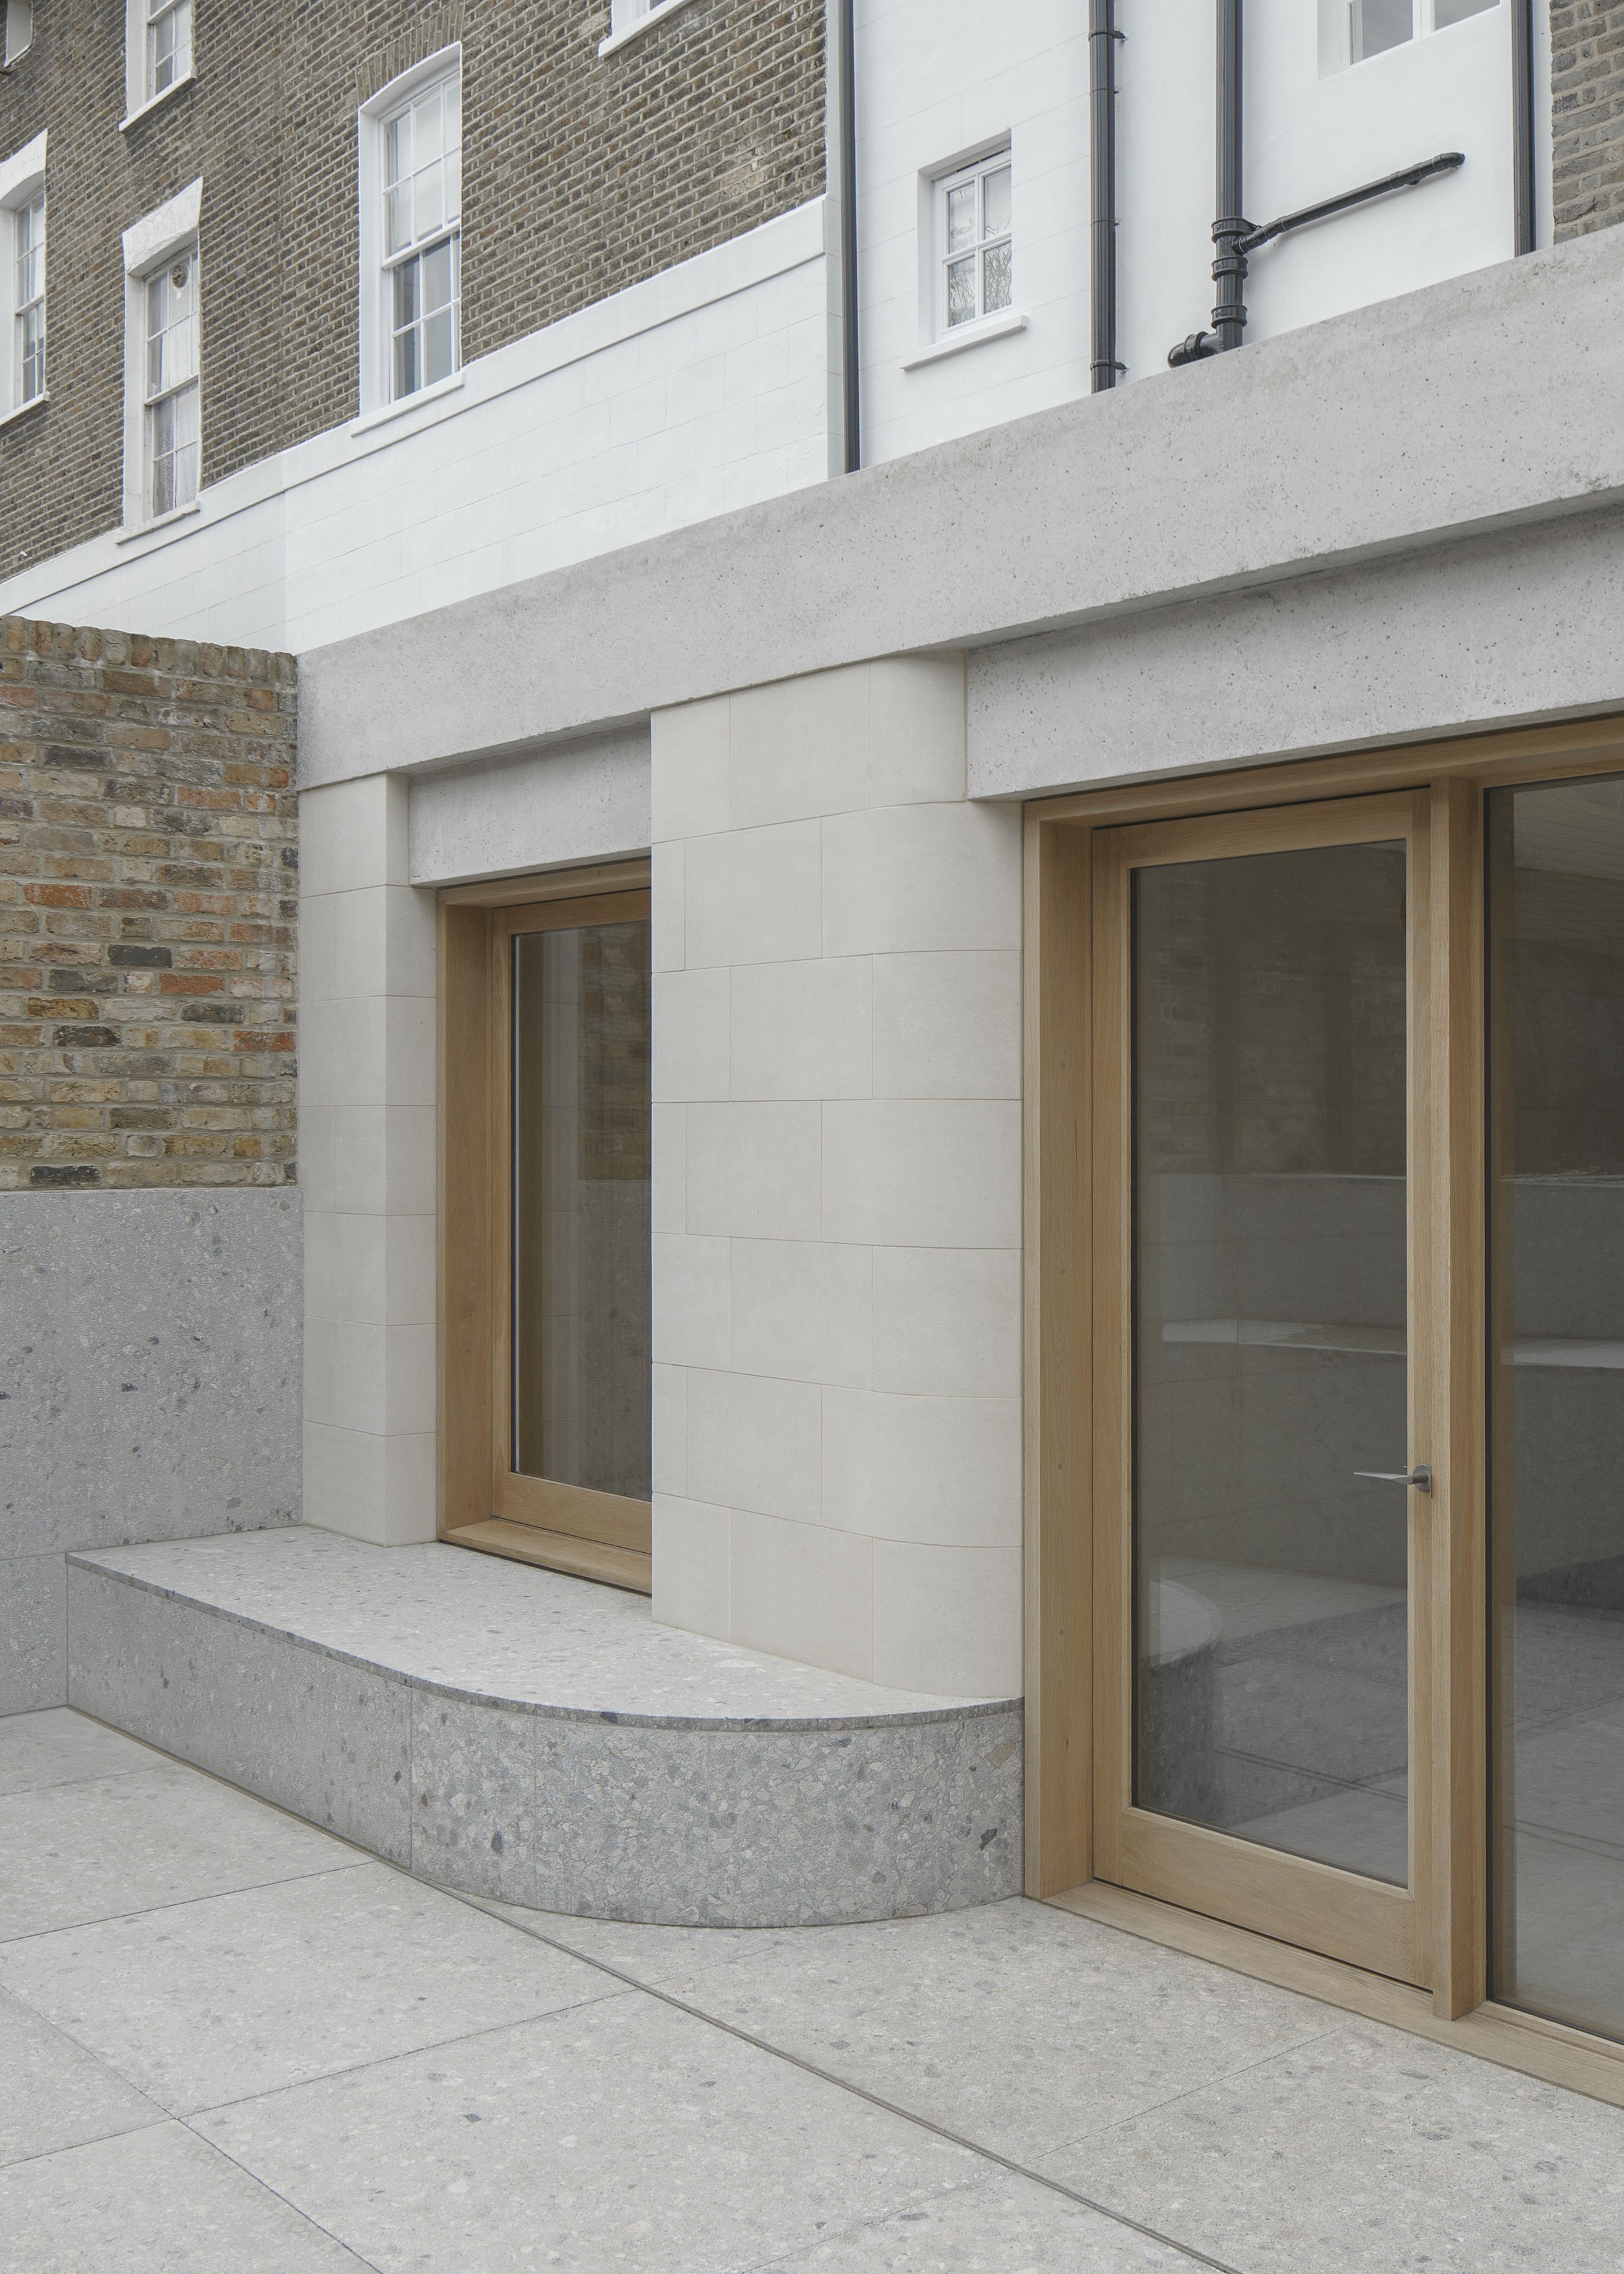 Architecture-for-London_Stone-House_Stone-extension-1_Credit_Building-Narratives.jpg